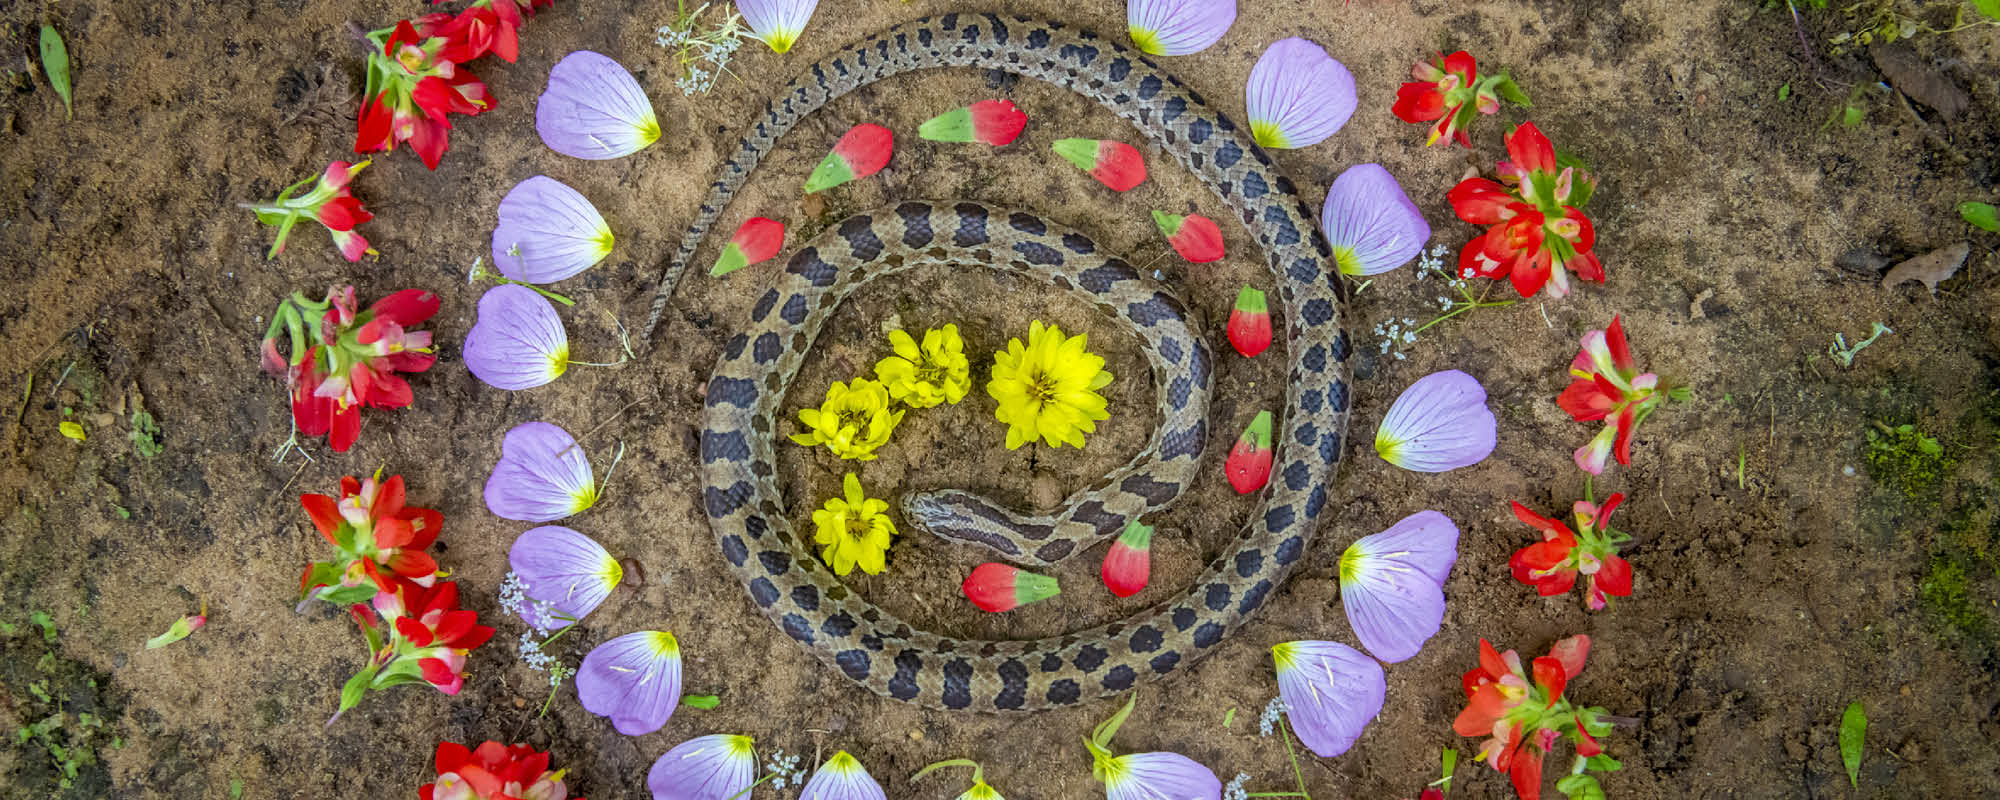 A snake encircled by yellow, red and purple flowers.